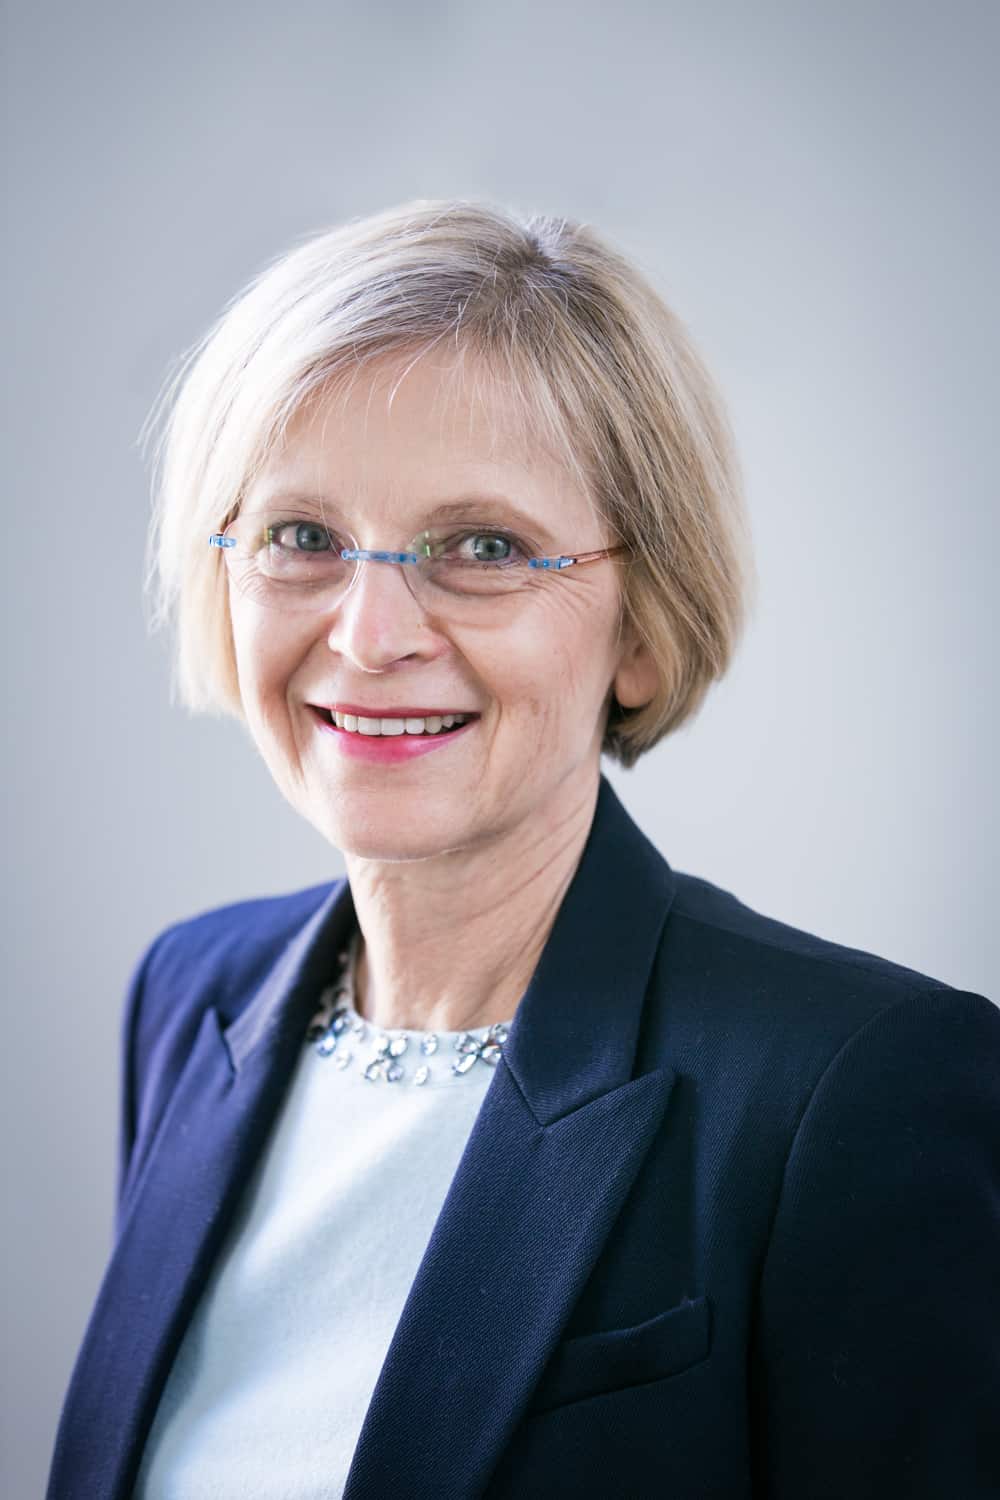 Older woman wearing navy blazer and glasses